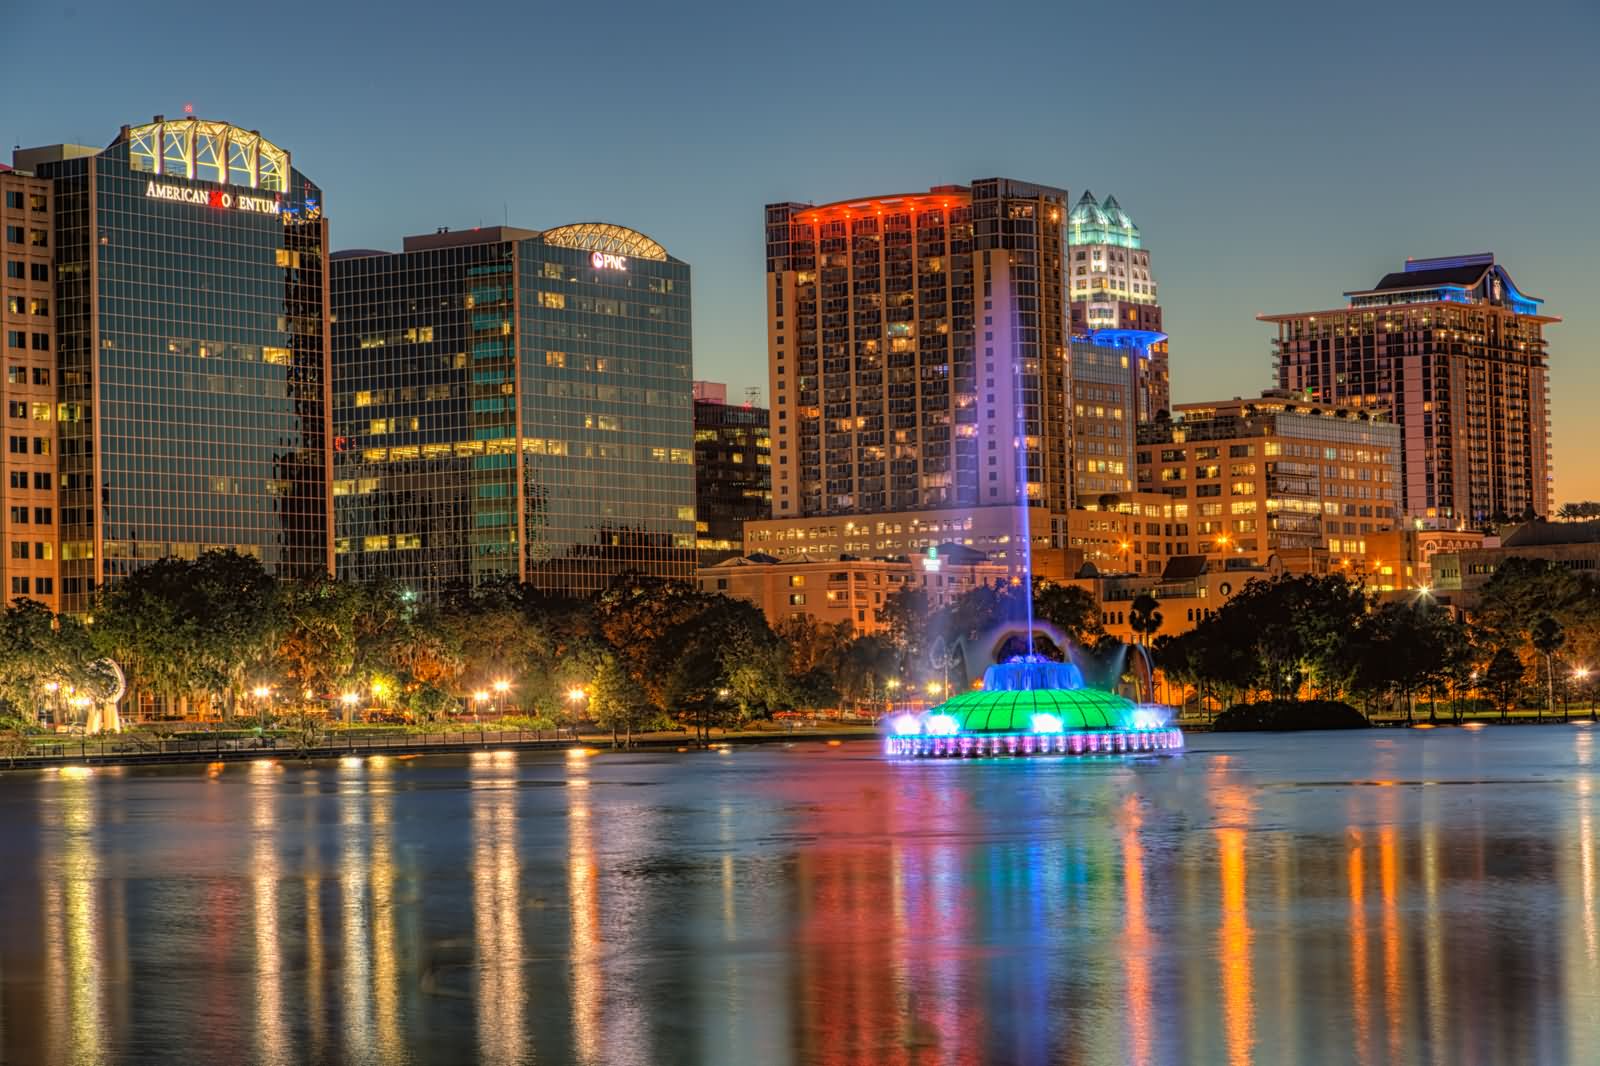 Reflections of the fountain and lights shining in Lake Eola, Orlando, FL